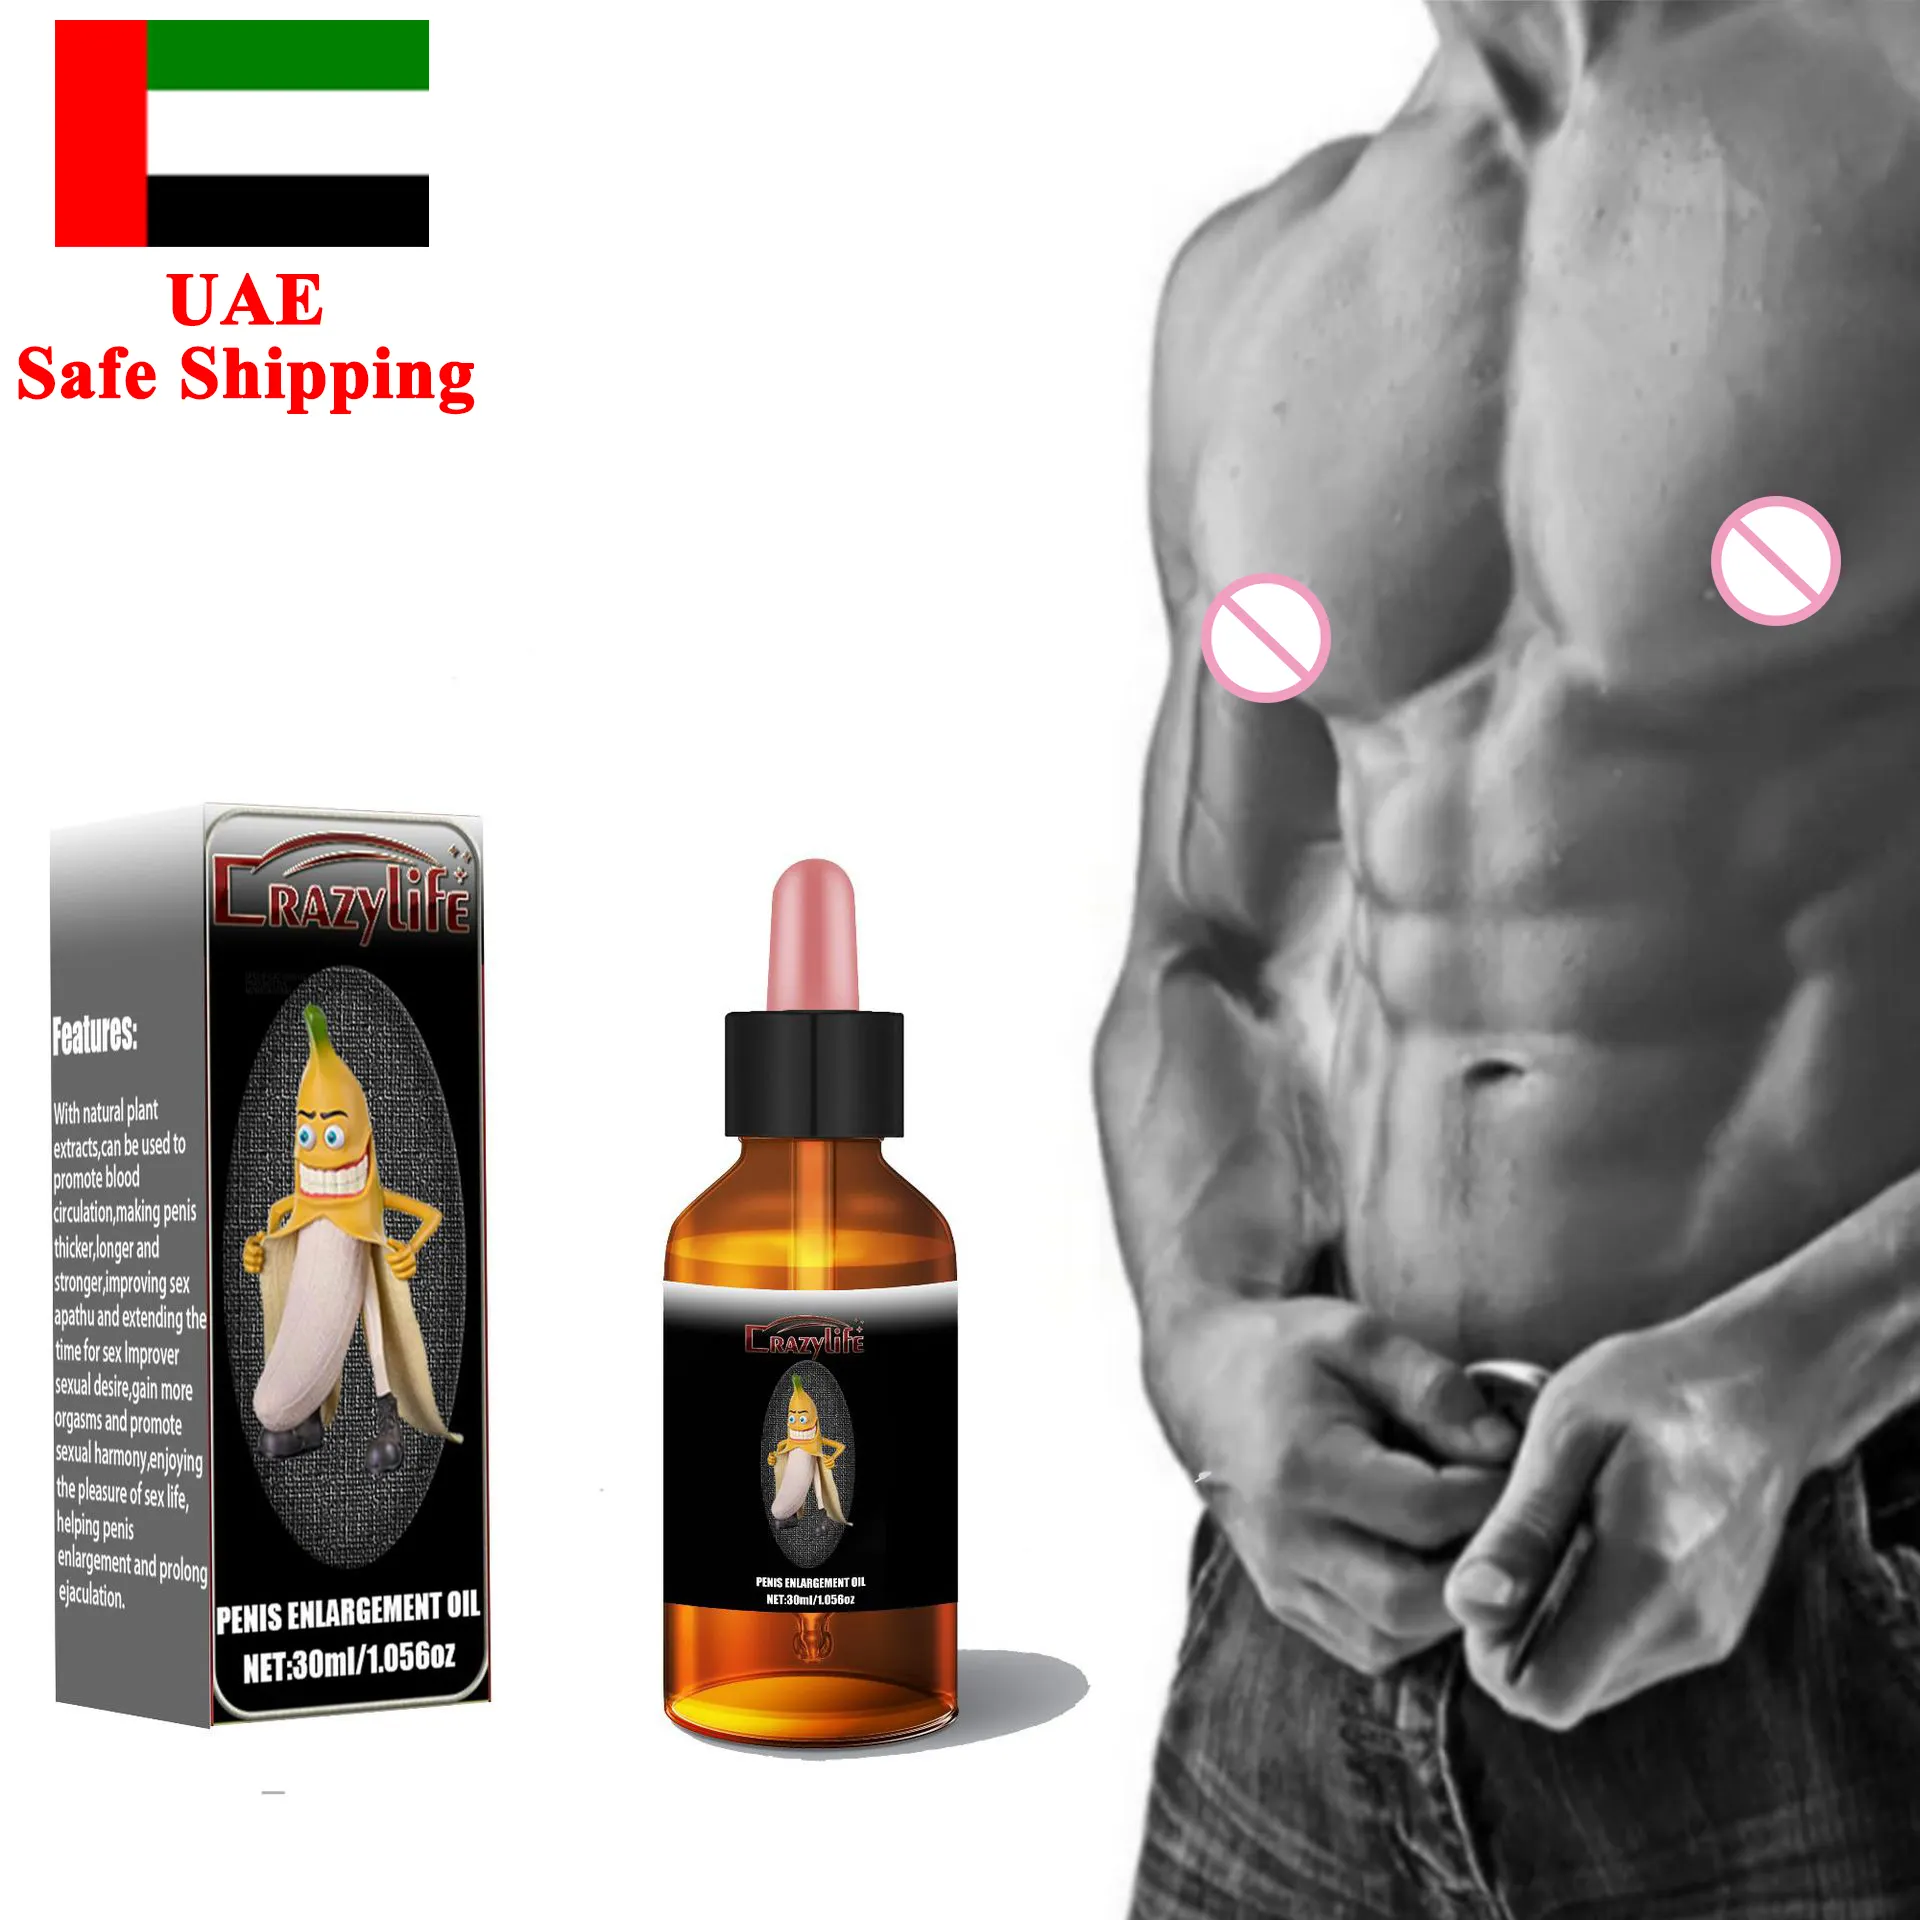 SHUNQU Increase The Size Of Oil Impotence Treatment Extract For Extended Duration Of Masculinity